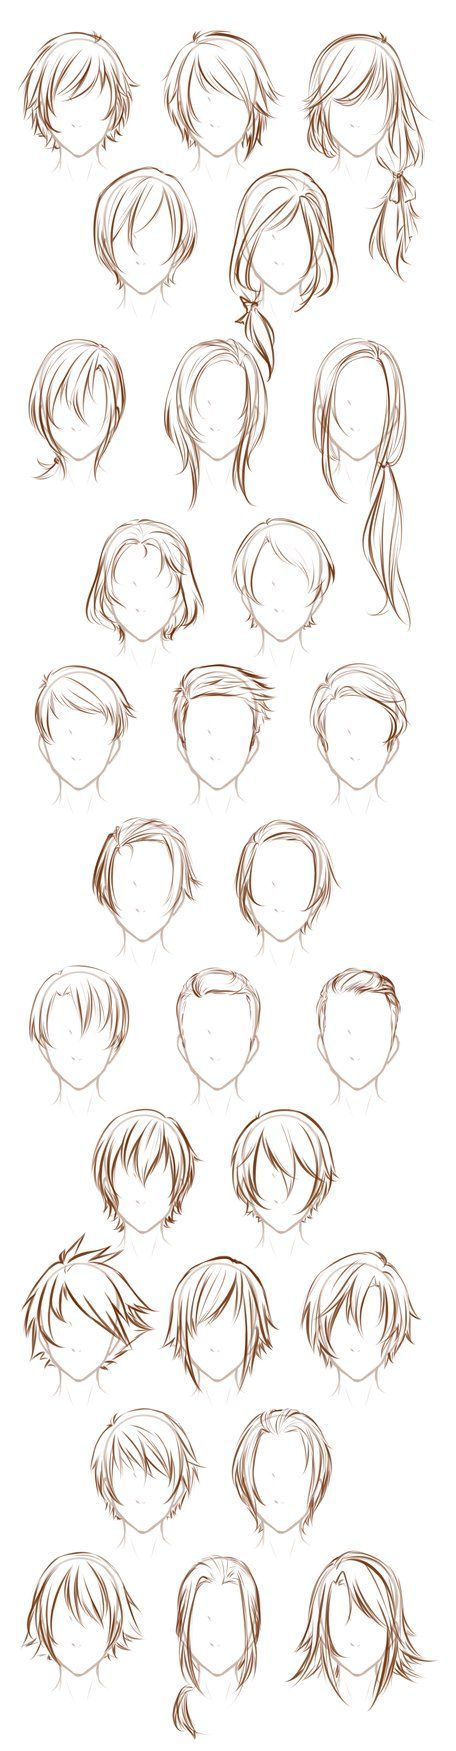 After sketching that sheet of Male Poses I decided to sketch out some of my male o